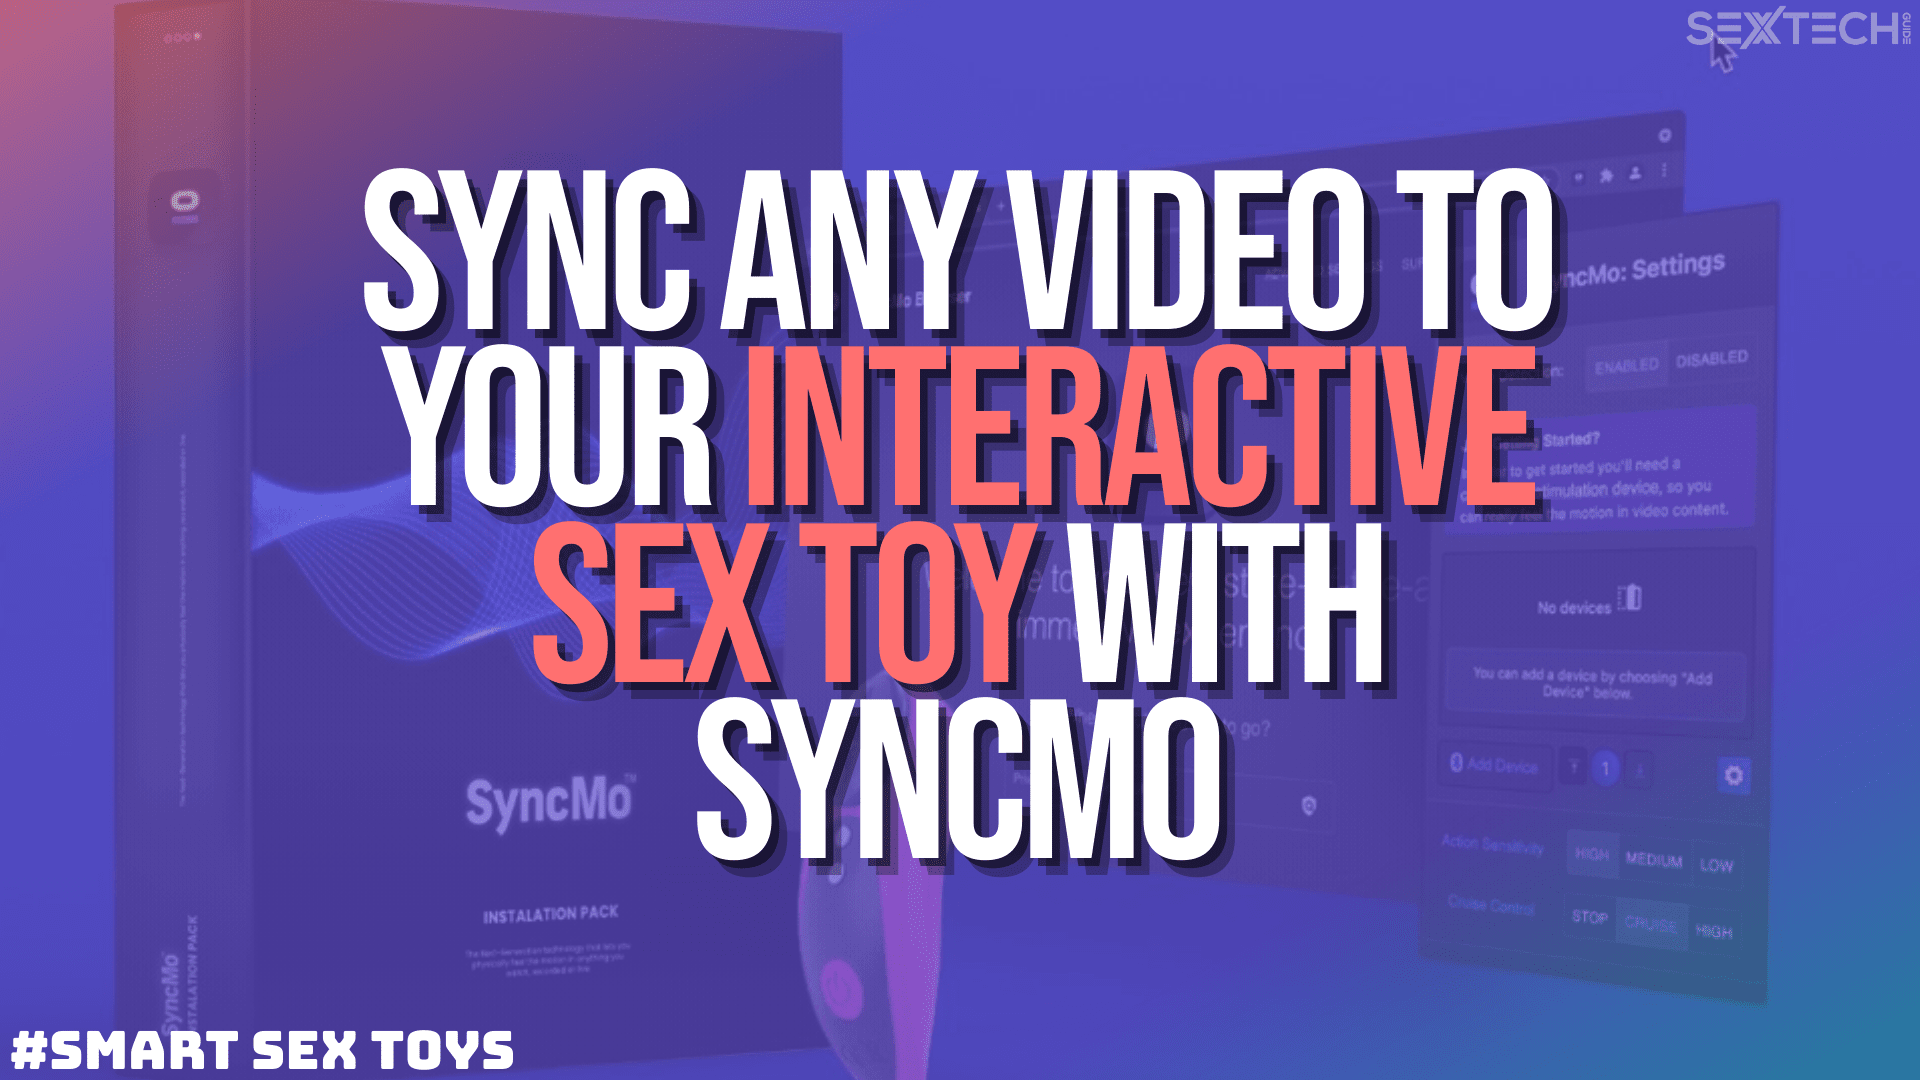 Going off script: SyncMo’s trying to change the way interactive sex toys work